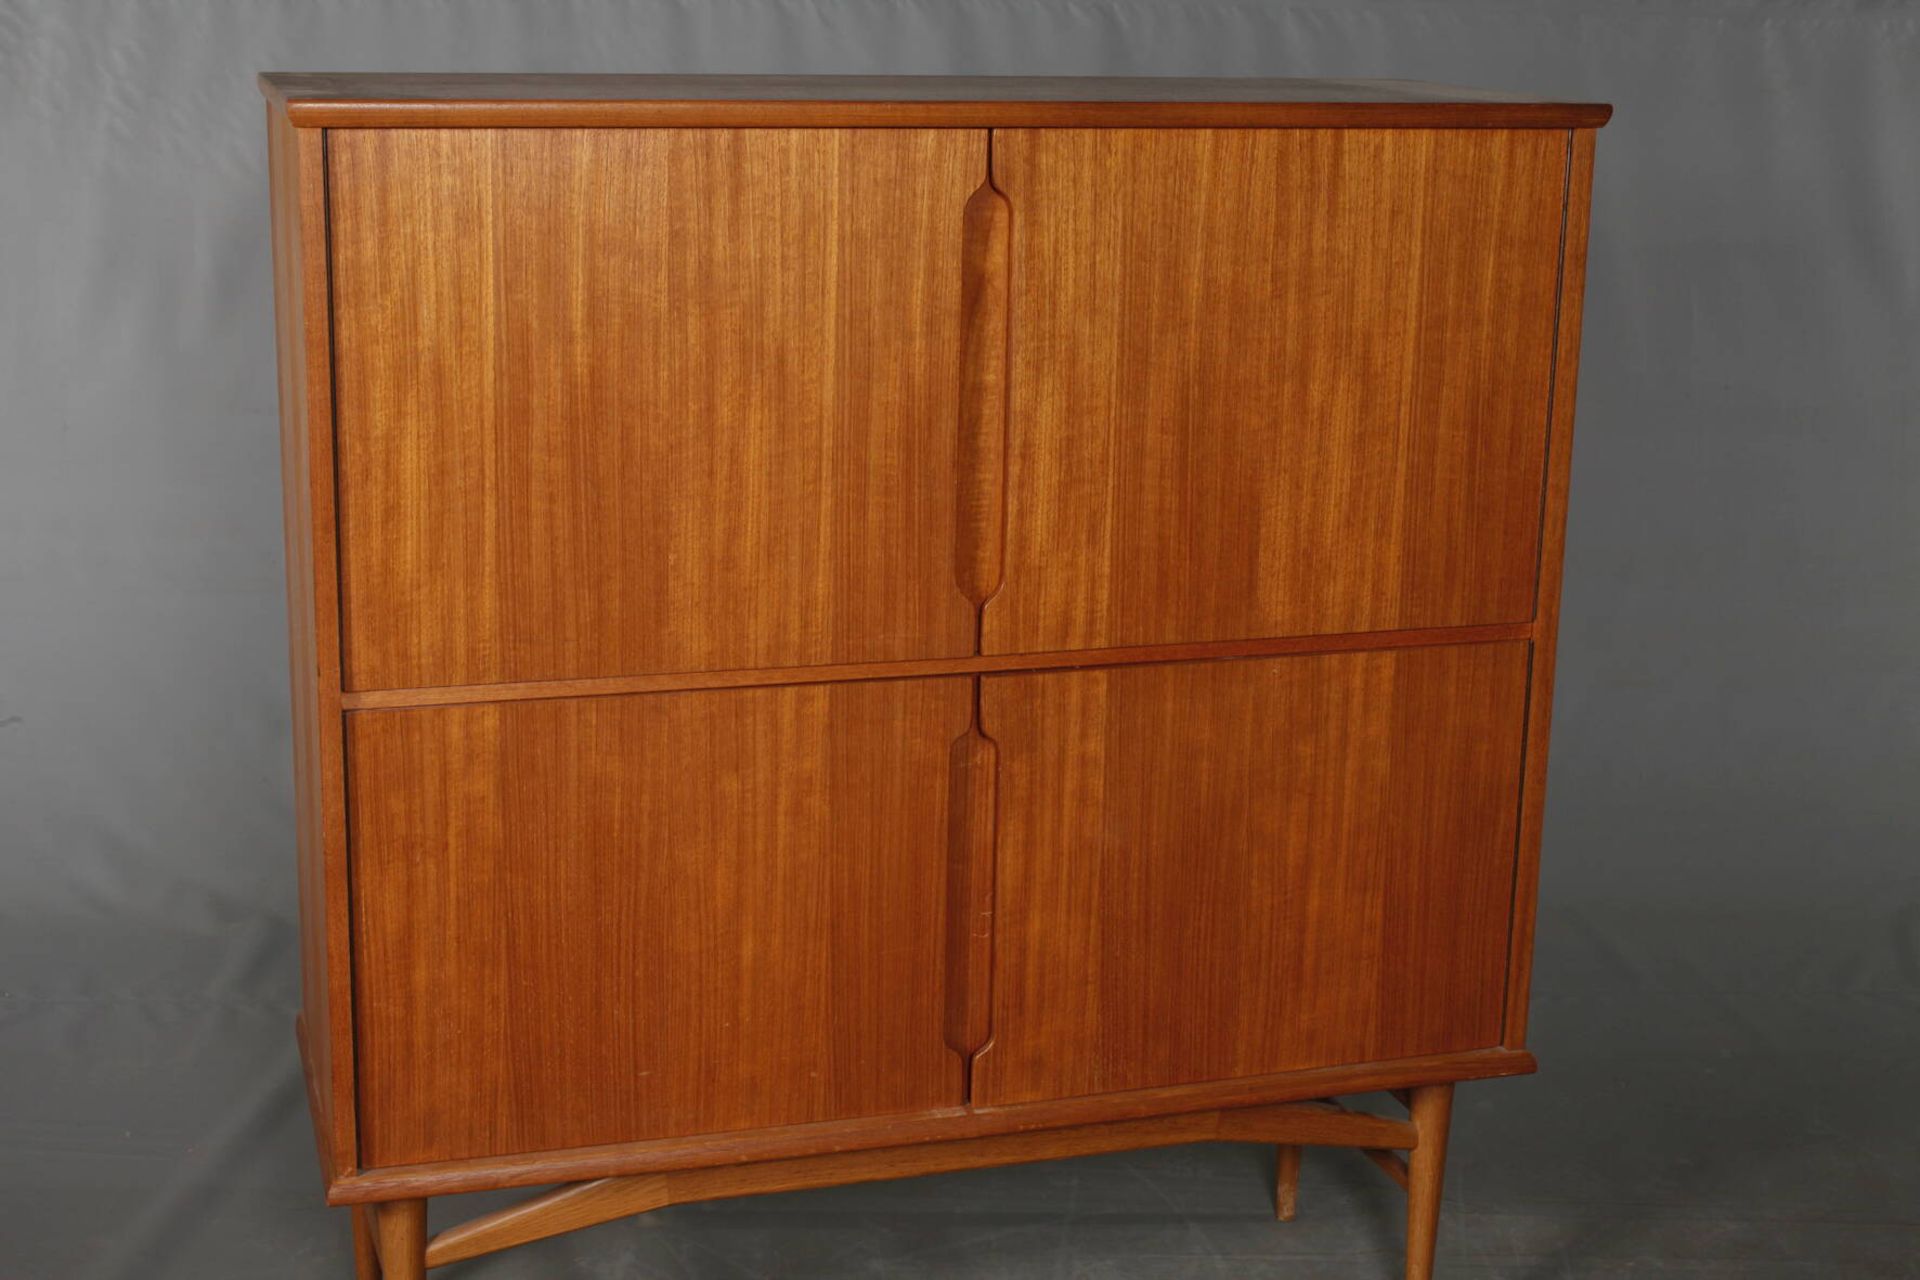 Highboard "Fredericia" - Image 2 of 4